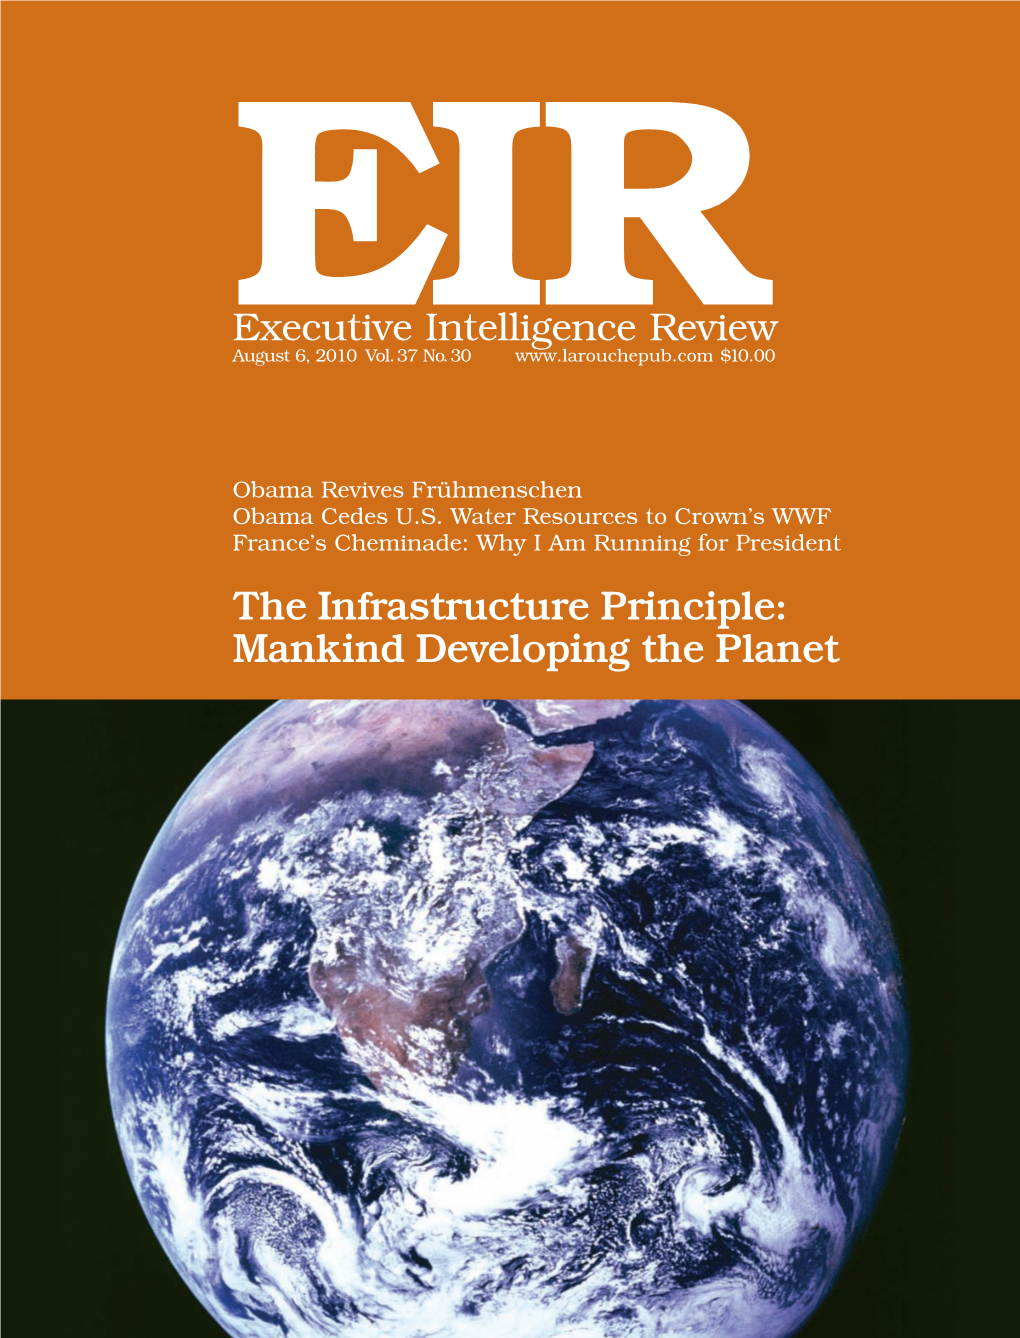 Executive Intelligence Review, Volume 37, Number 30, August 6, 2010